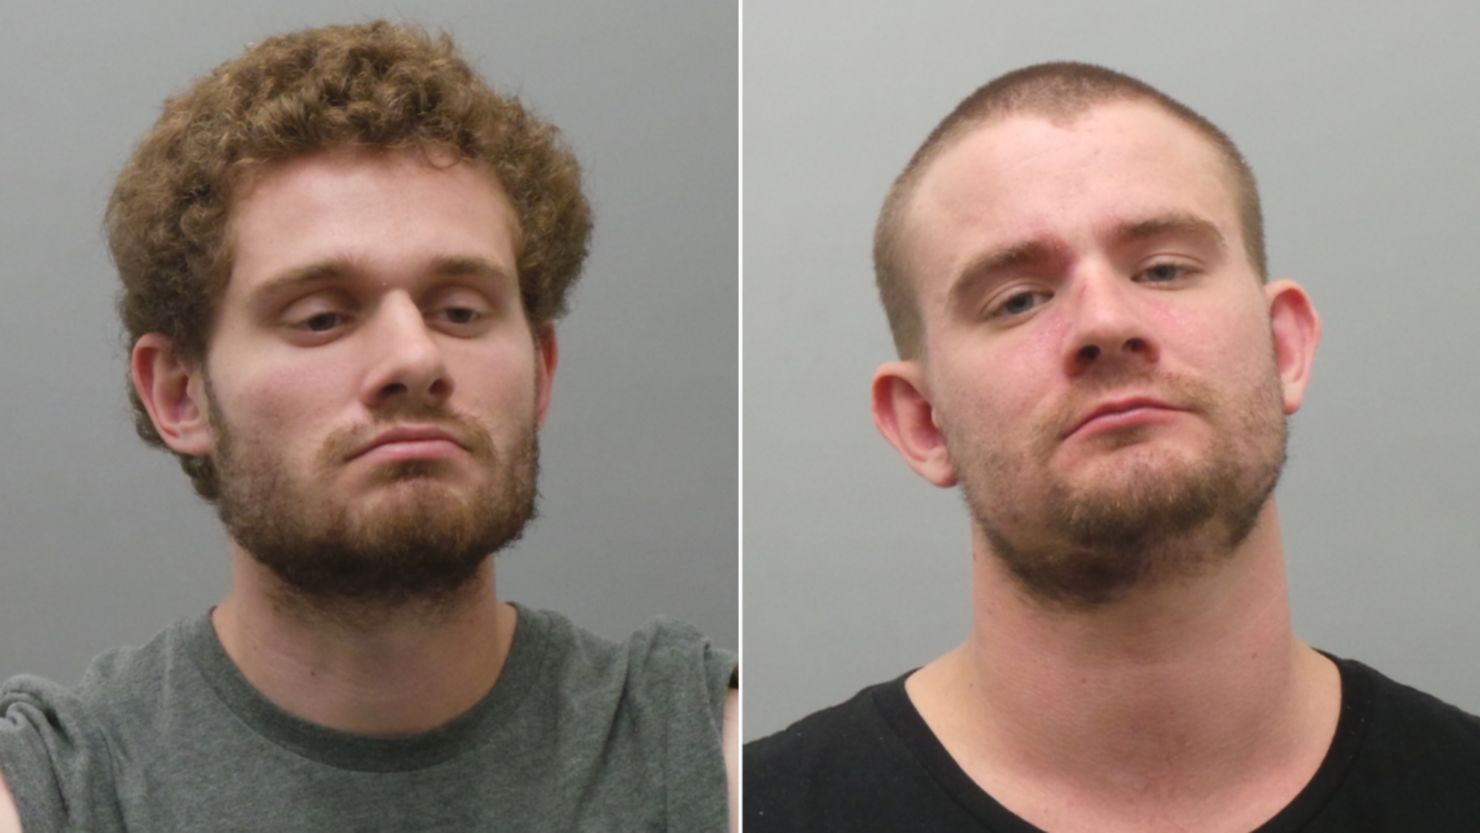 Joseph Marino, 24, and Nicholas Marino, 27, were arrested in what police say is a road rage incident.